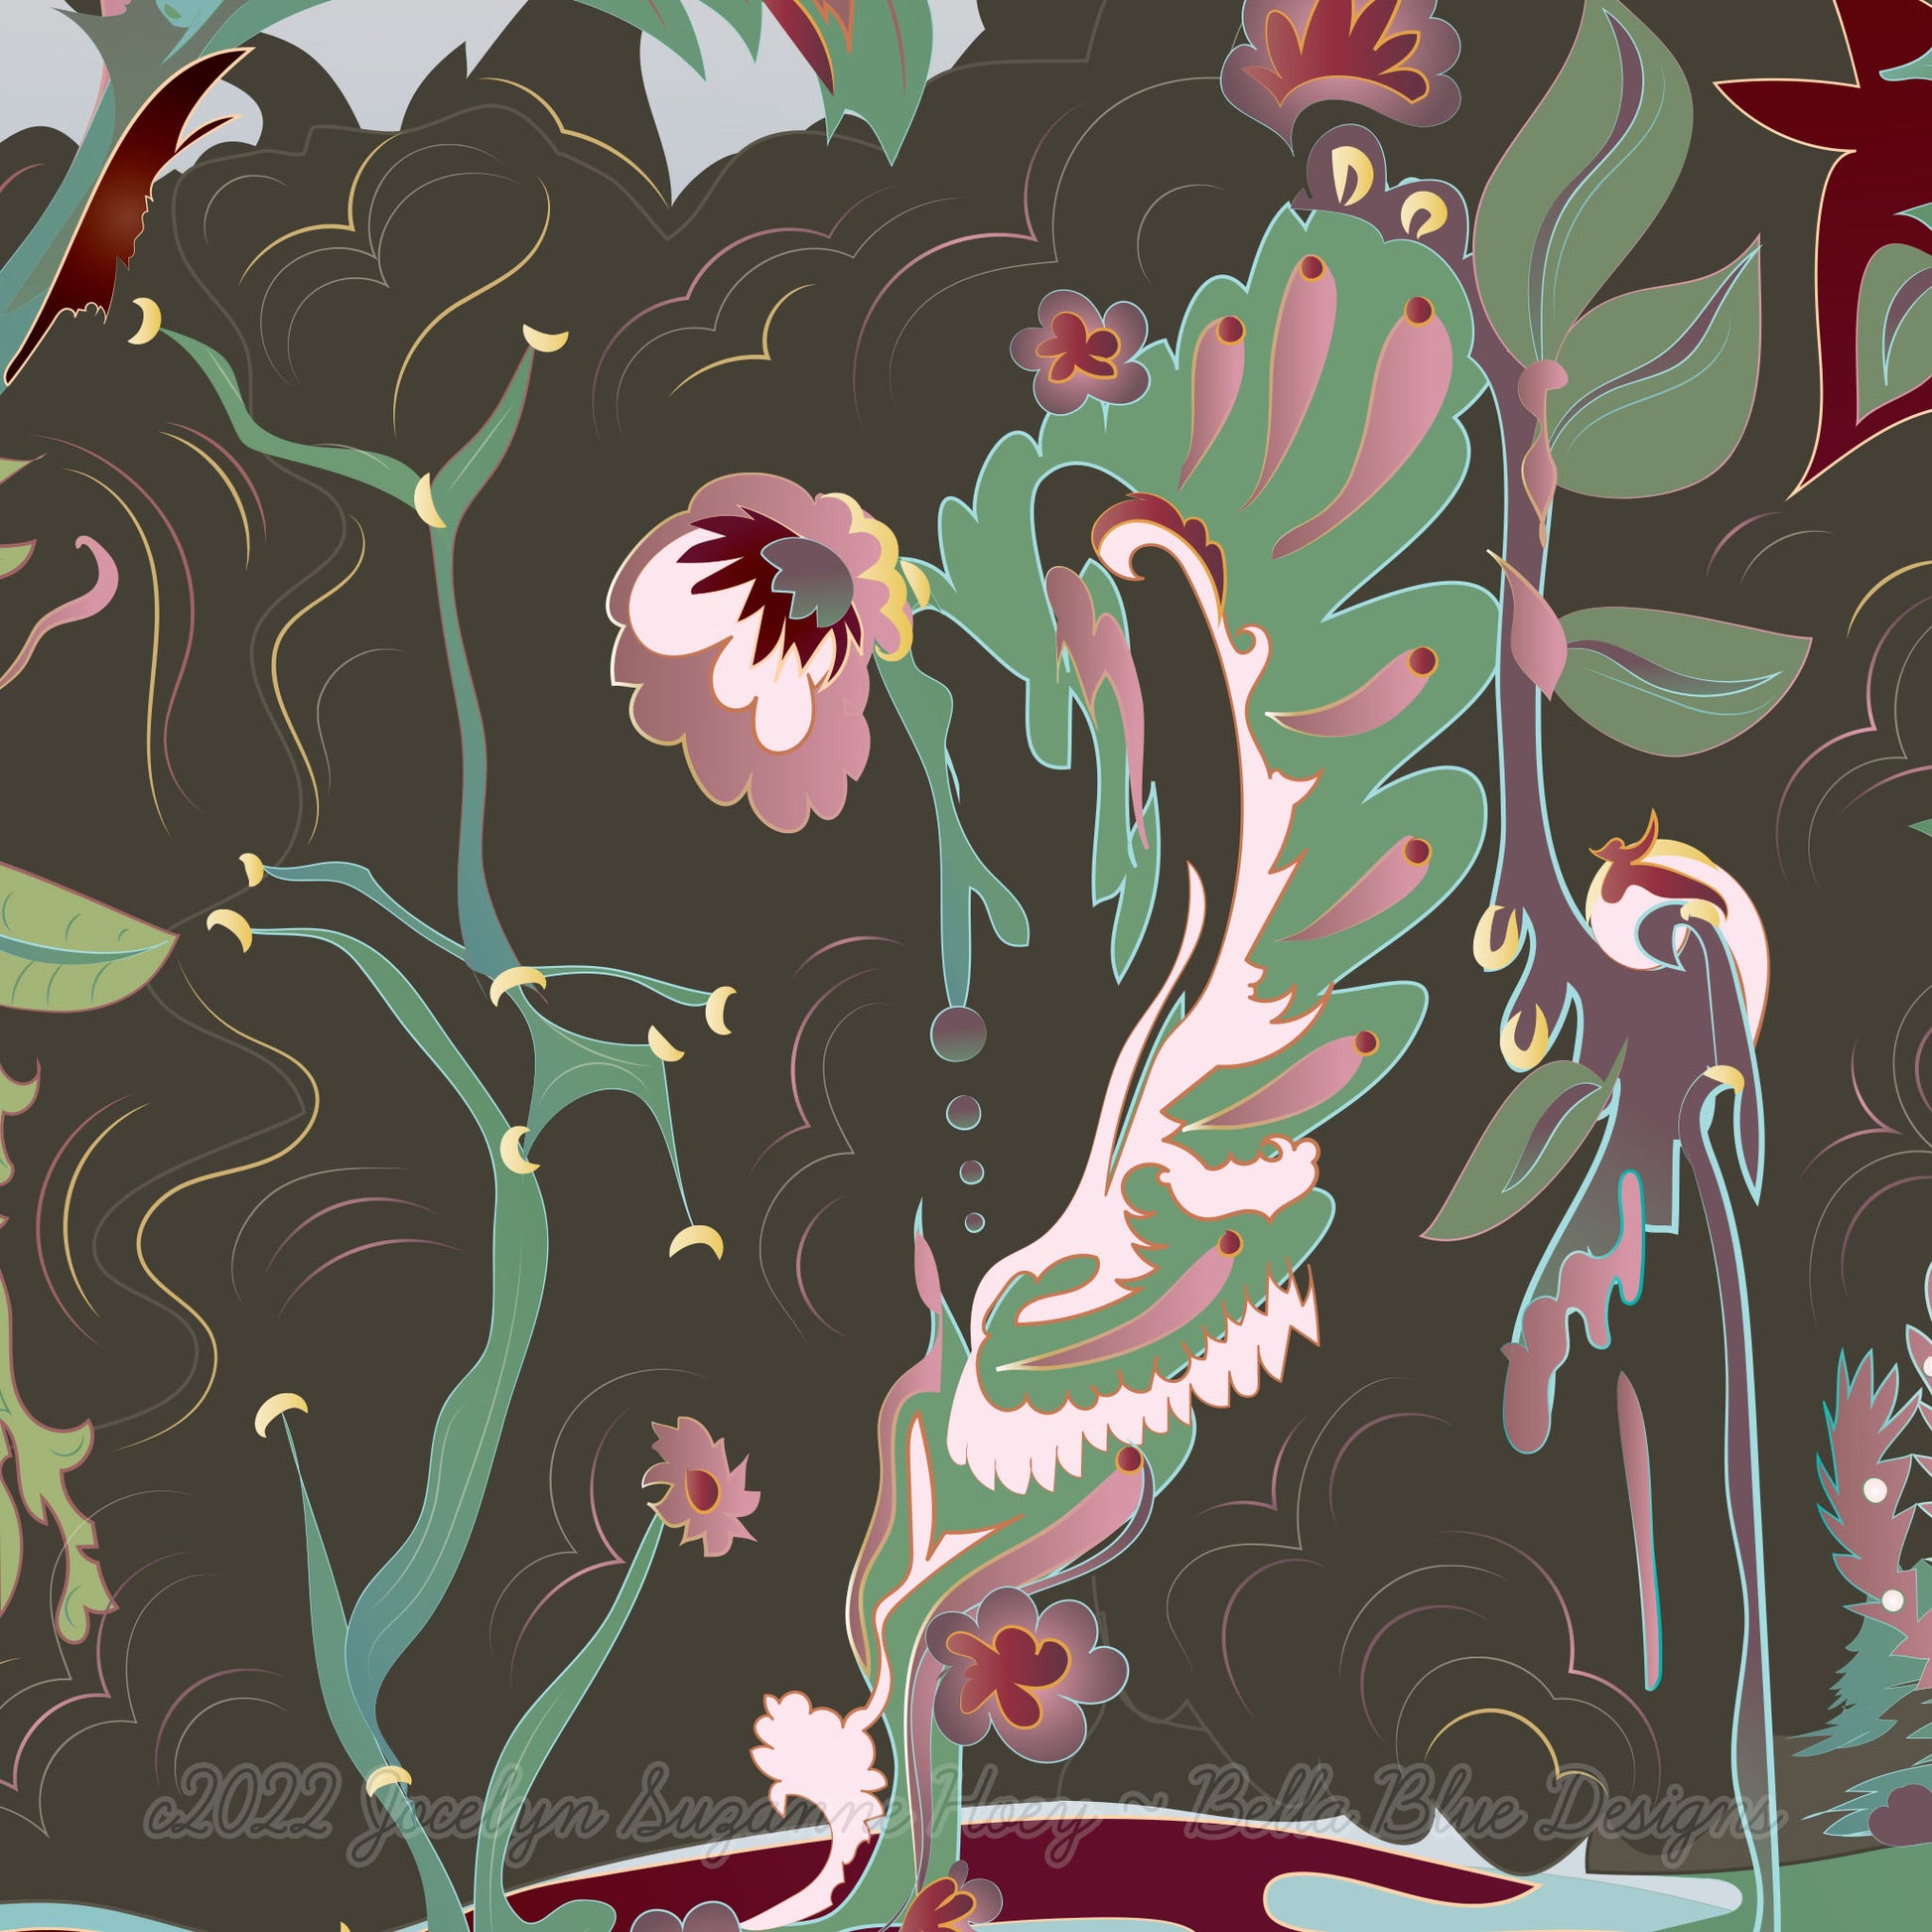 closeup from the digital design illustration of the hummingbird queen, showing flowers and leaves